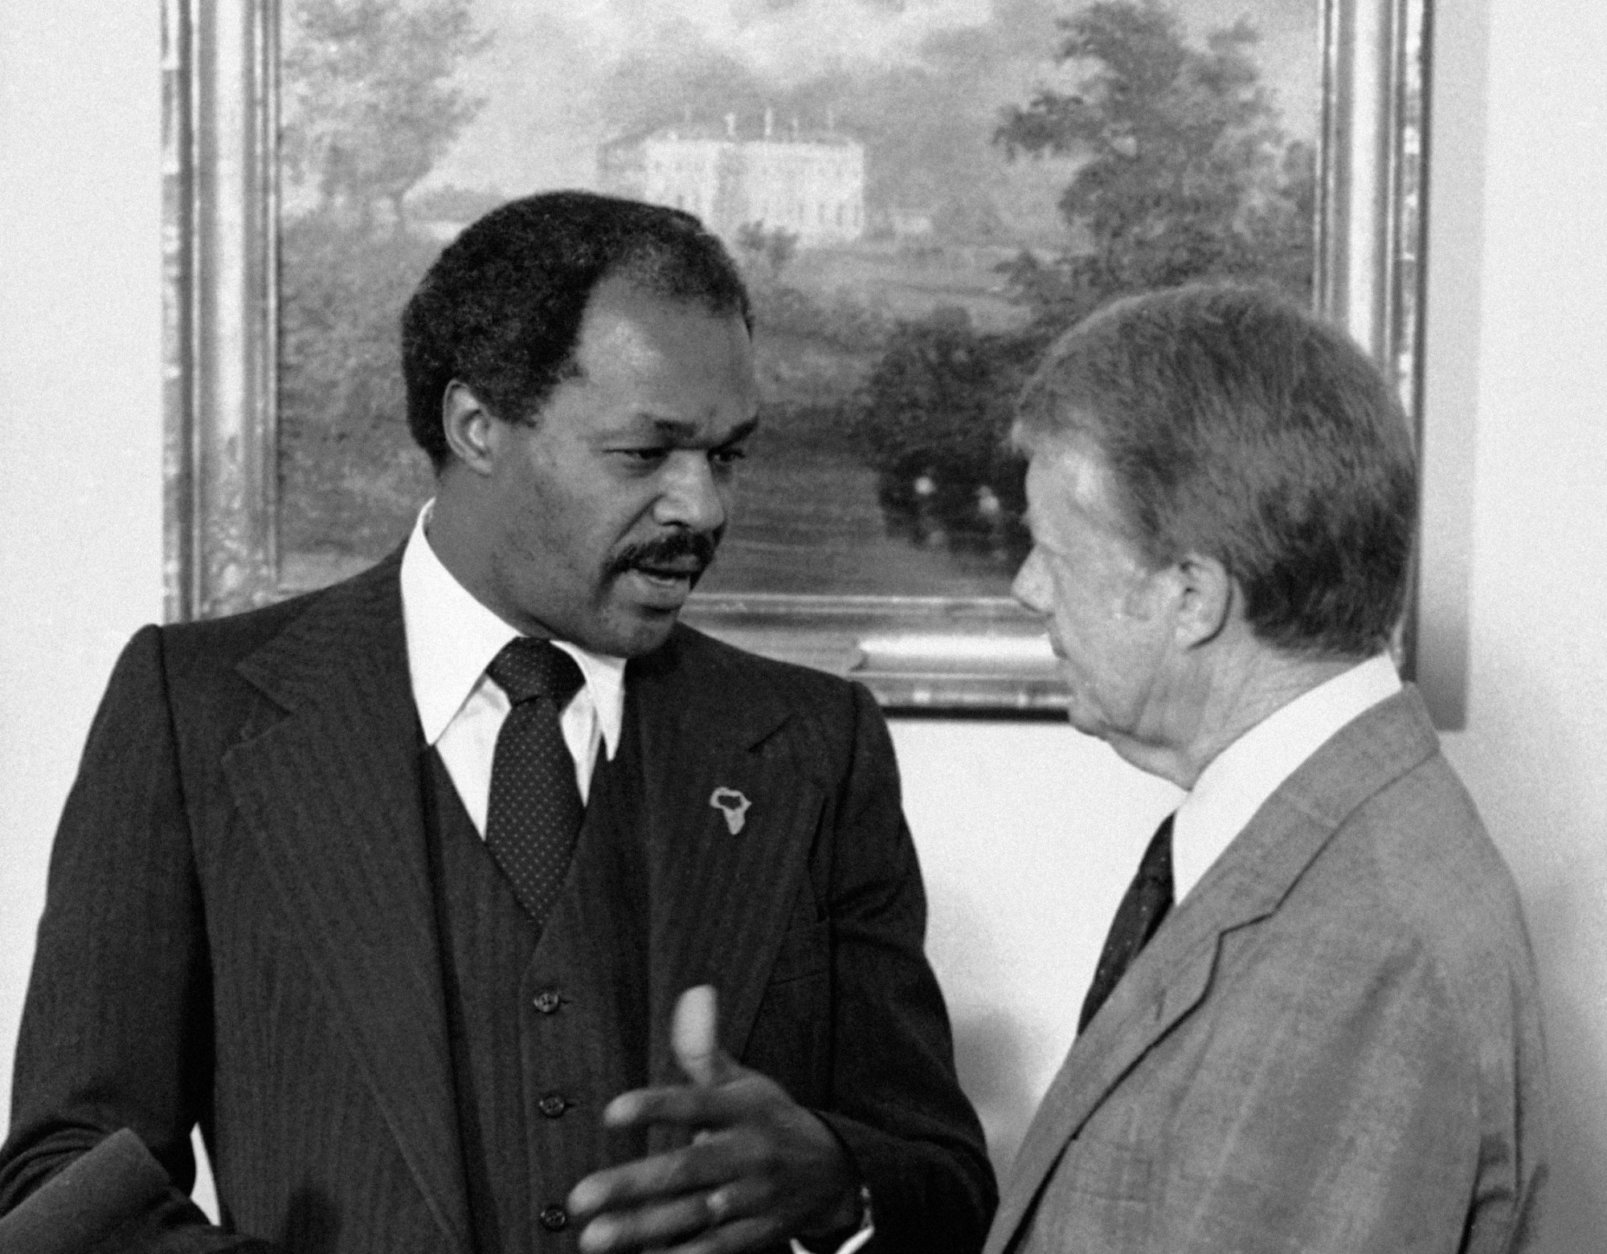 District of Columbia Mayor Marion Barry chats with President Jimmy Carter during their meeting at the White House in Washington, Jan. 11, 1979. They discussed the first days of Barry's administration. (AP Photo/Mark Wilson)